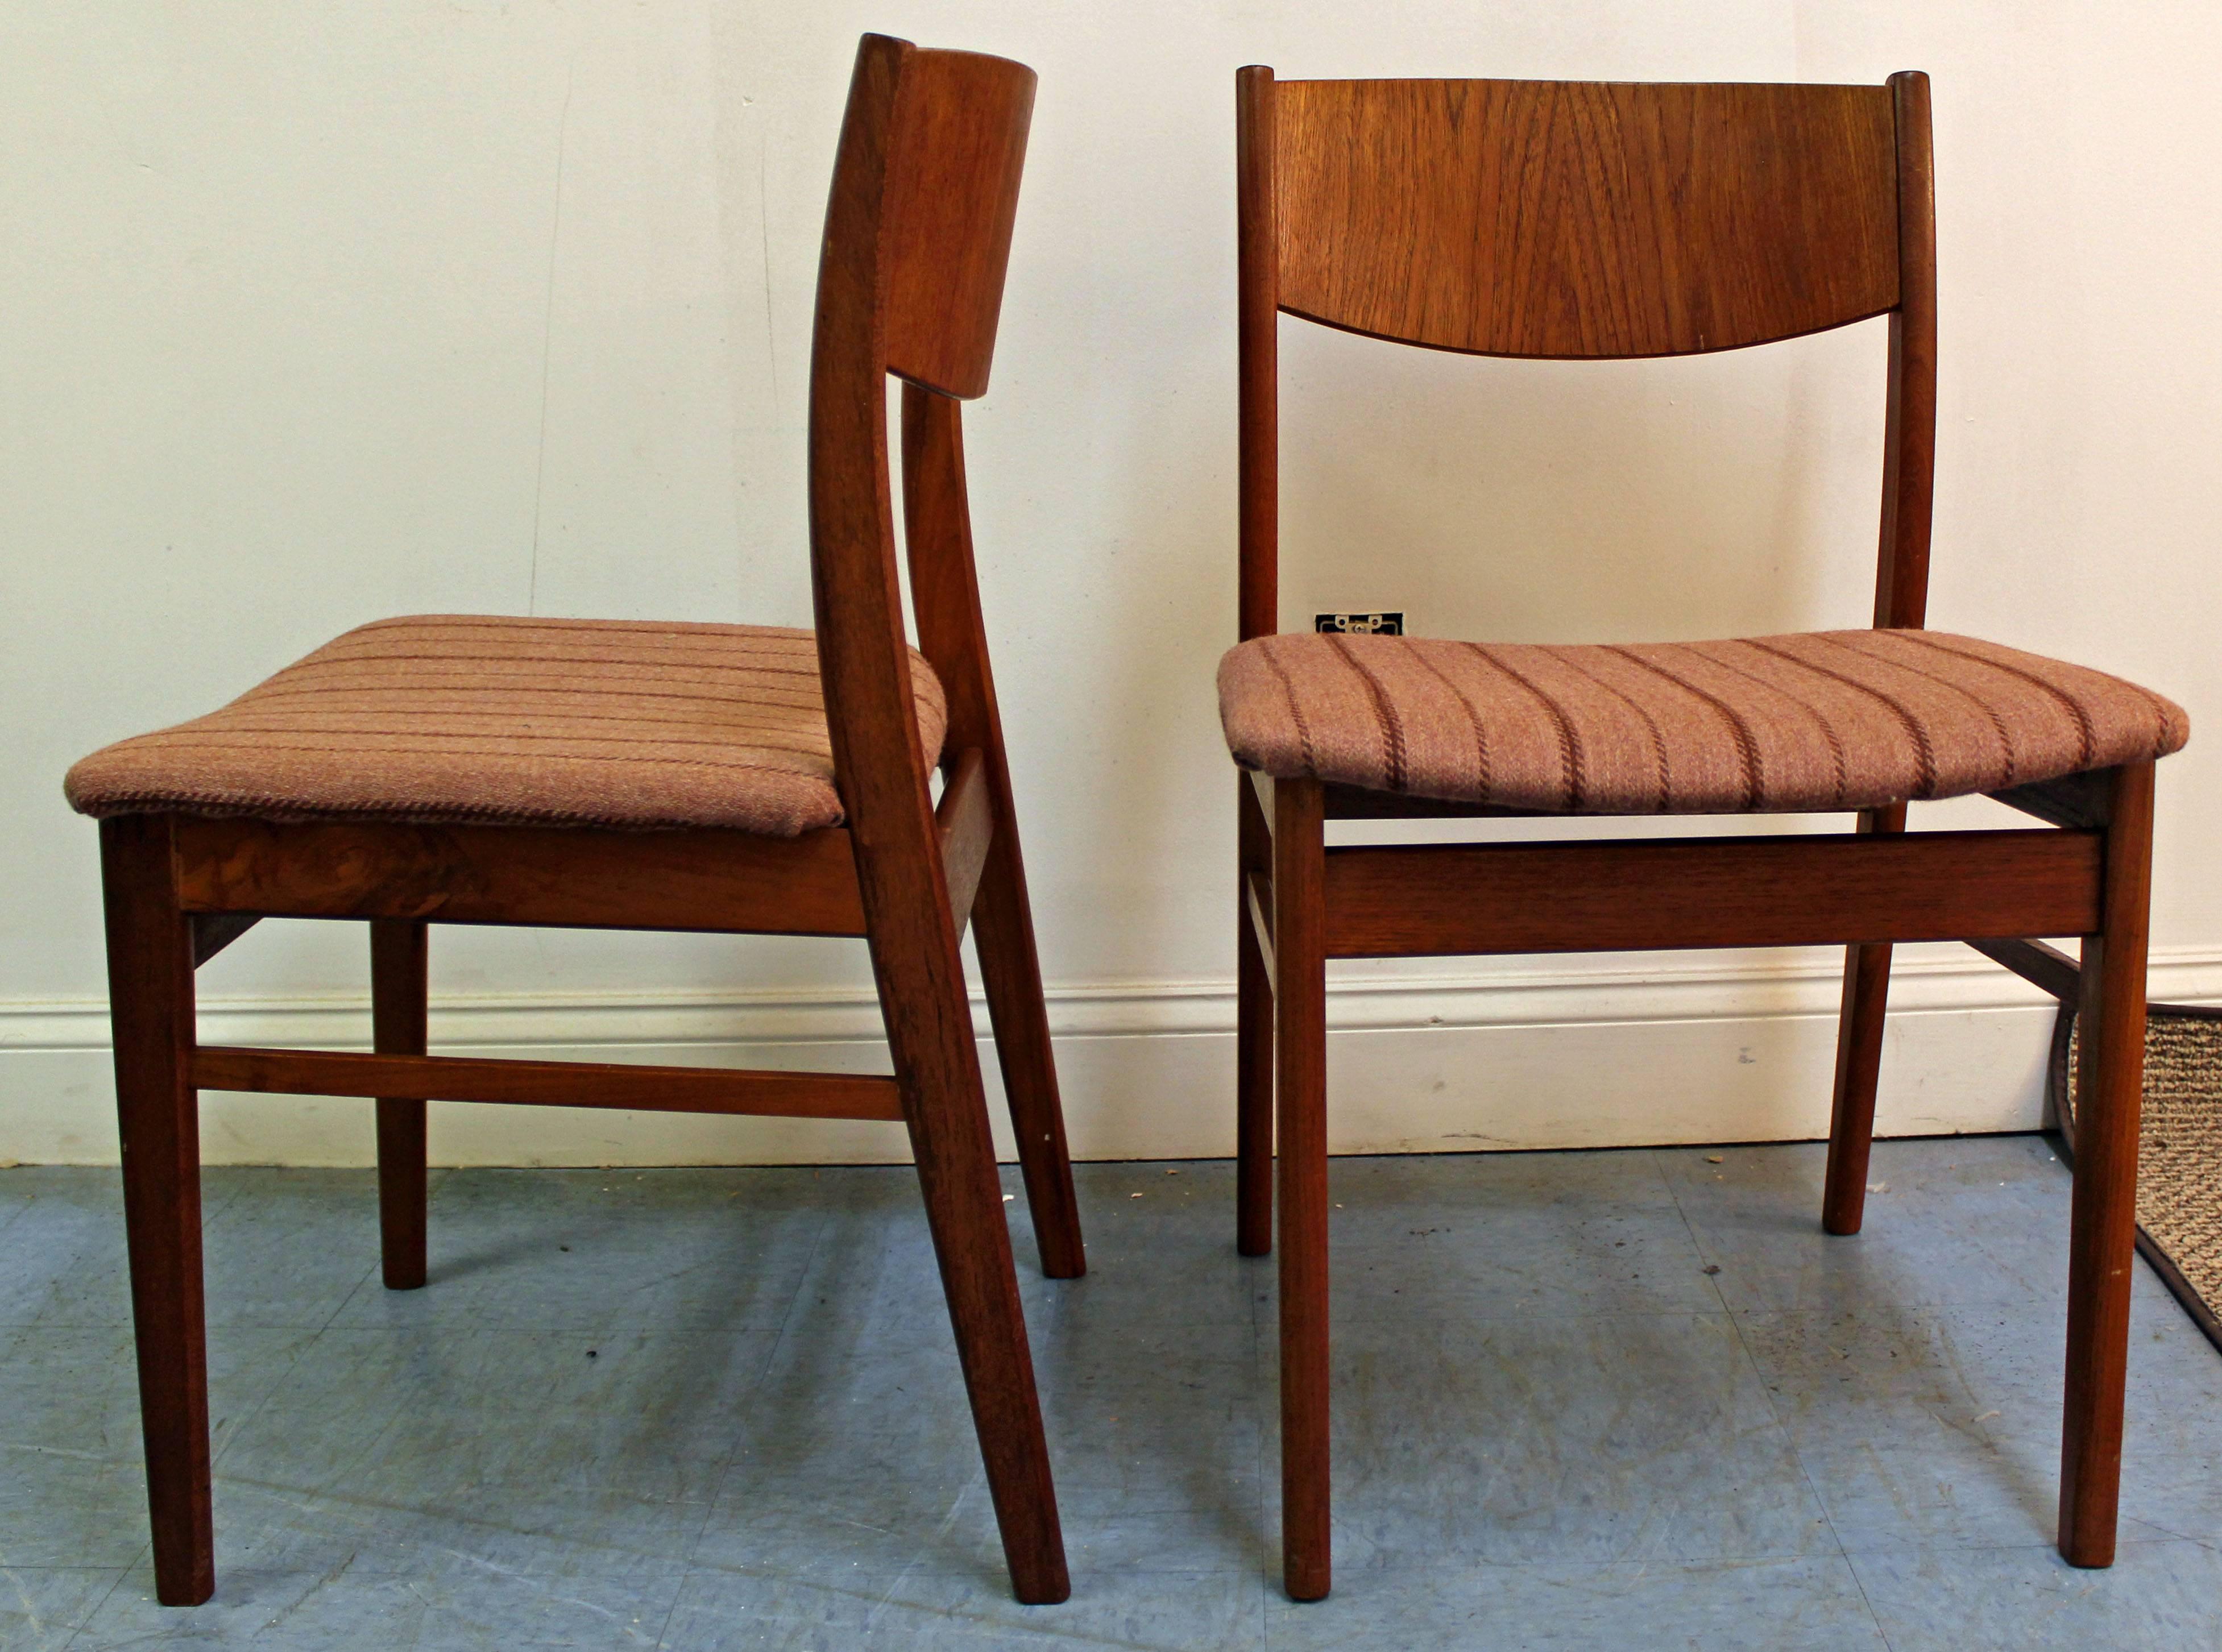 Offered is a set of eight Danish modern dining chairs. Includes eight teak side chairs.

Dimensions: 
18.75